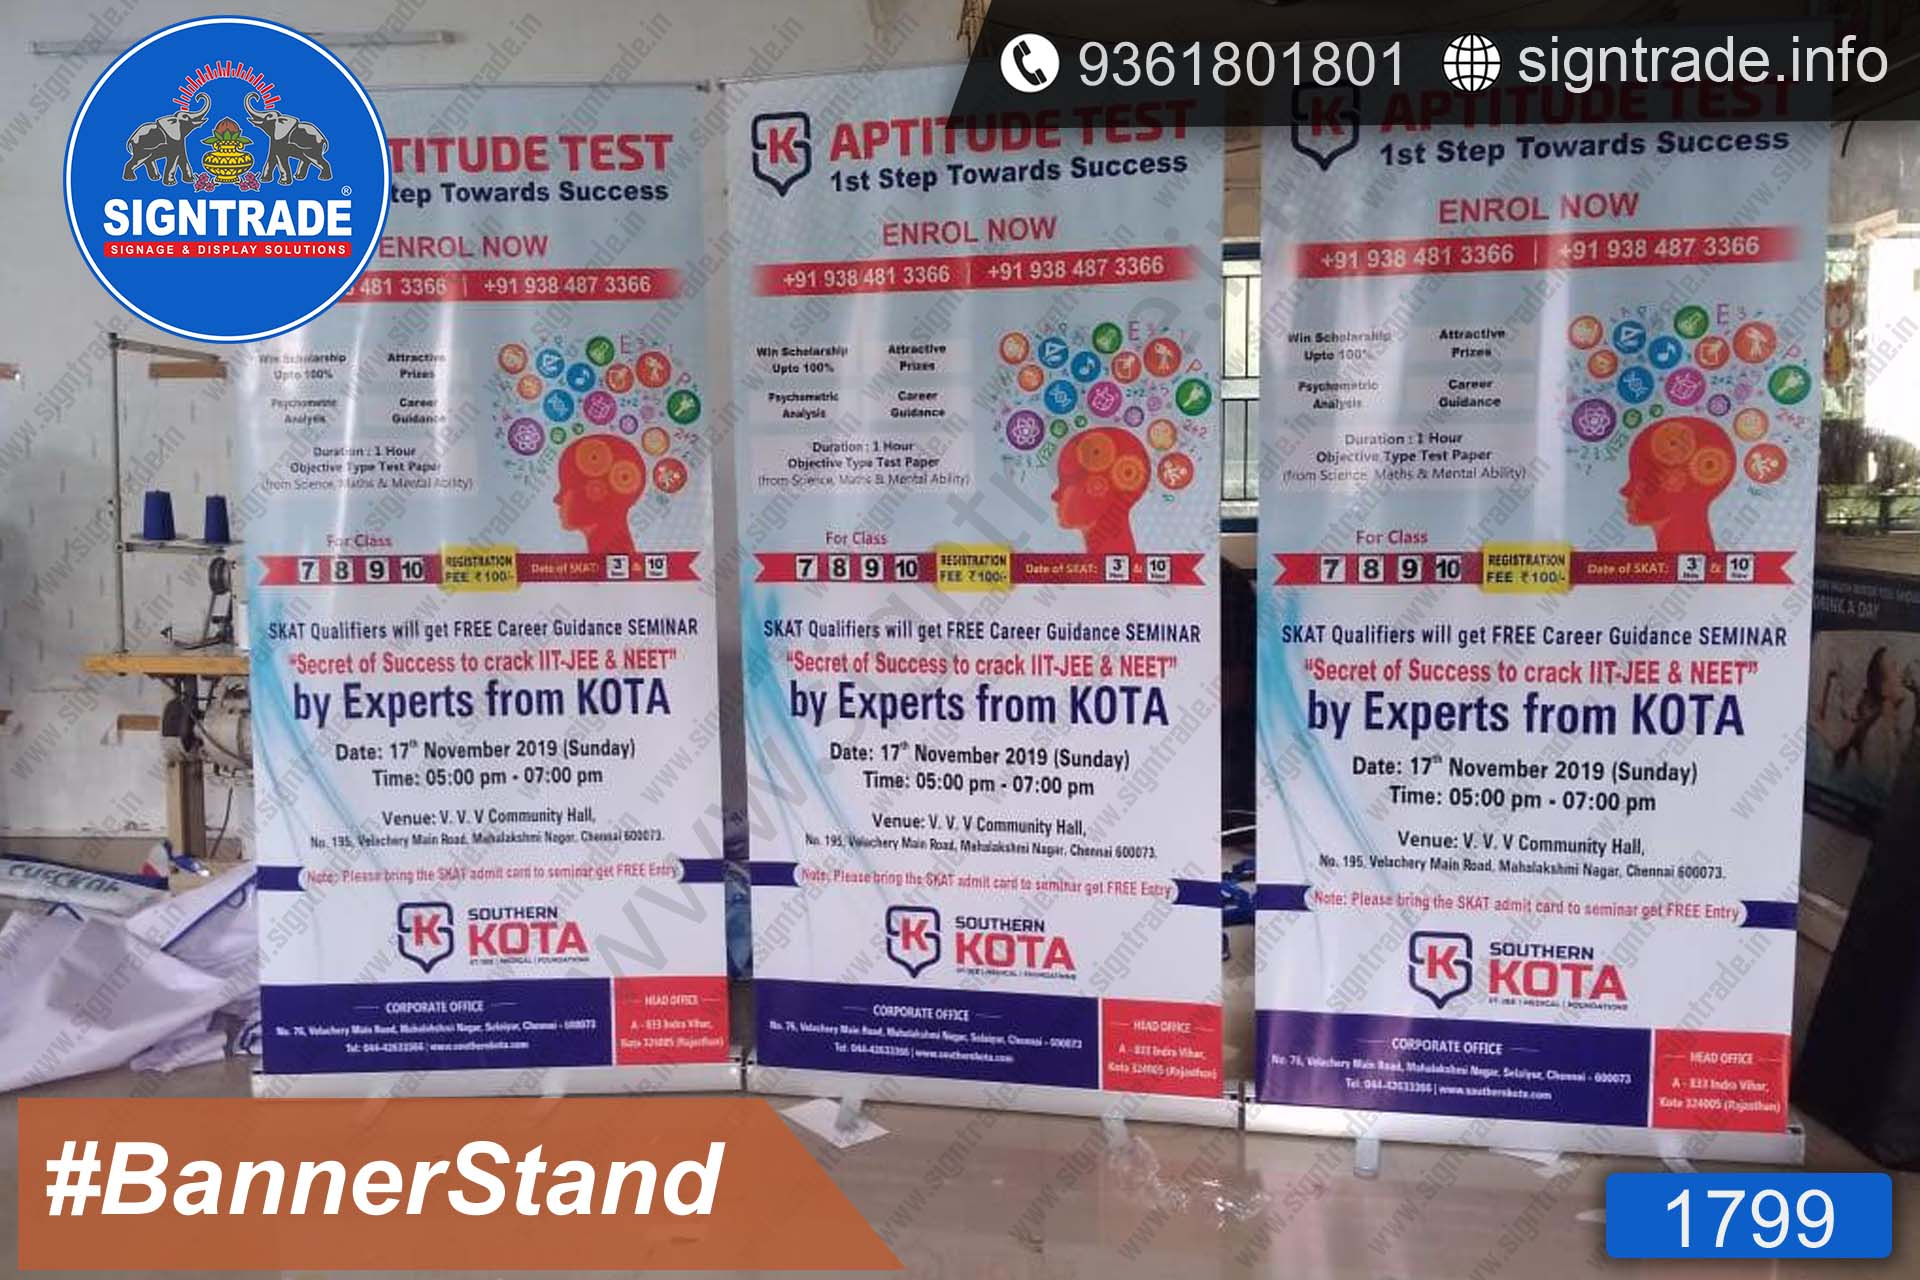 southernkota banner stand